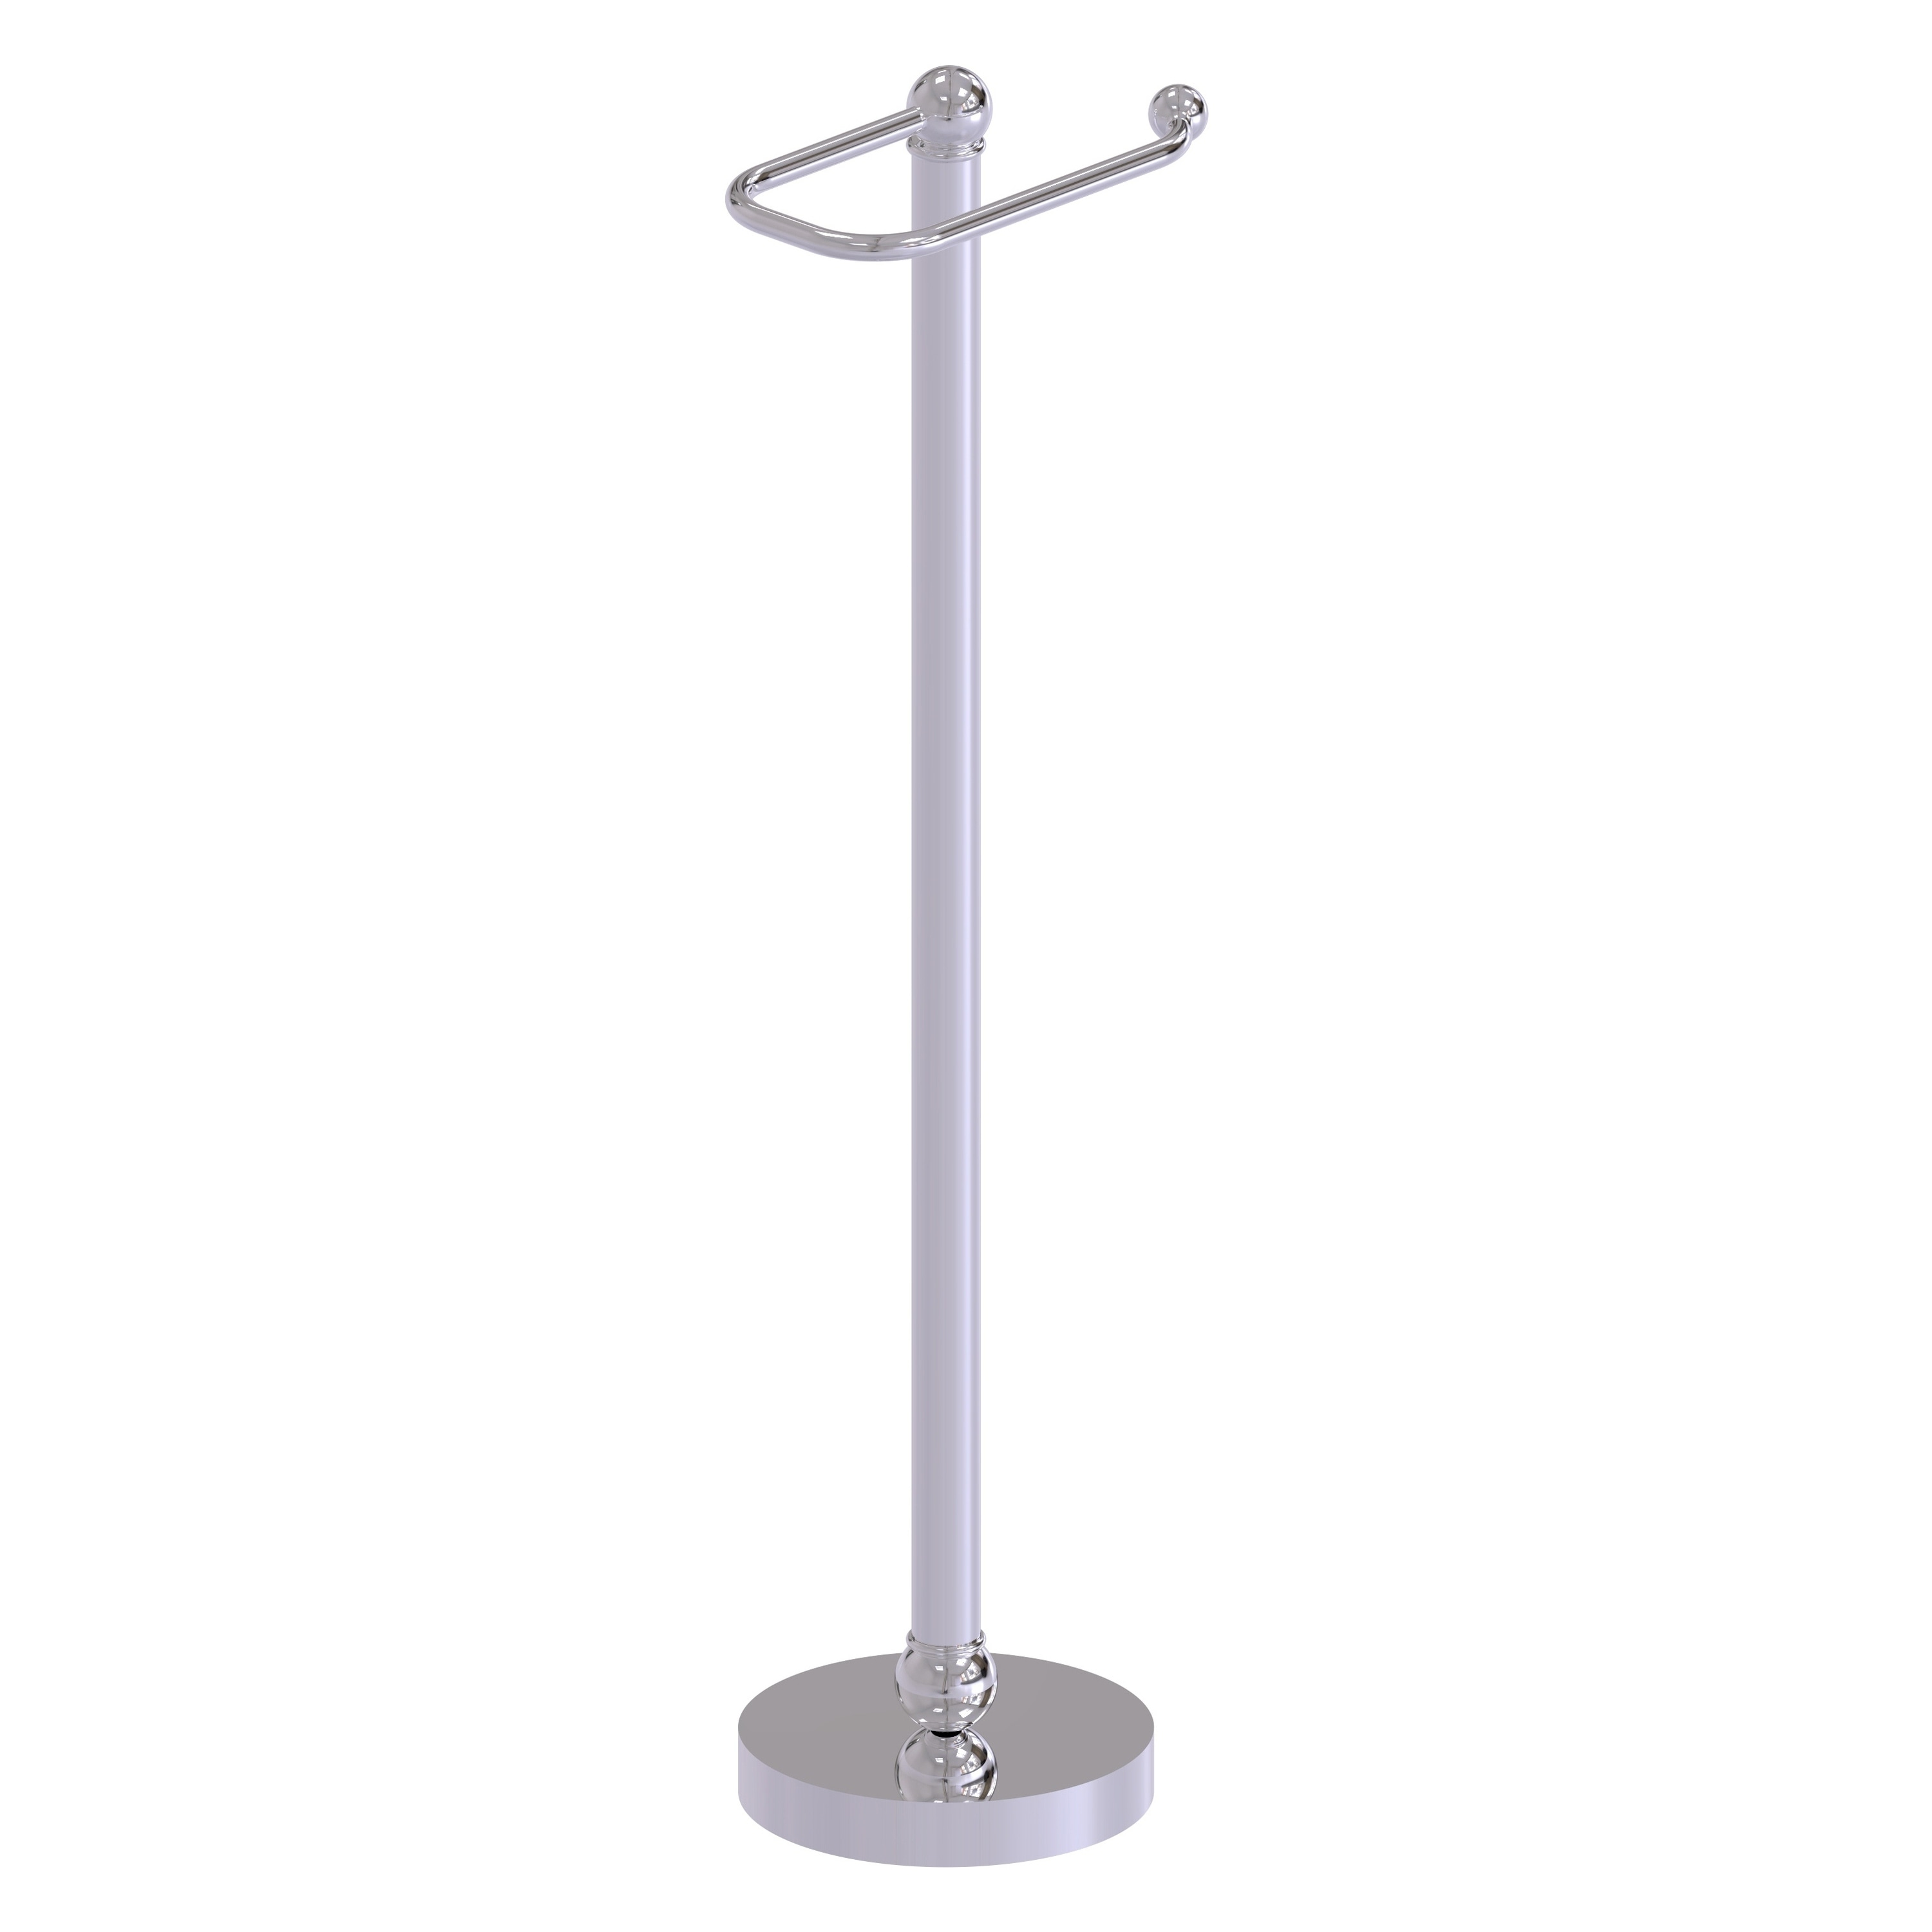 DW 11, Freestanding Toilet Paper Holder in Polished Chrome